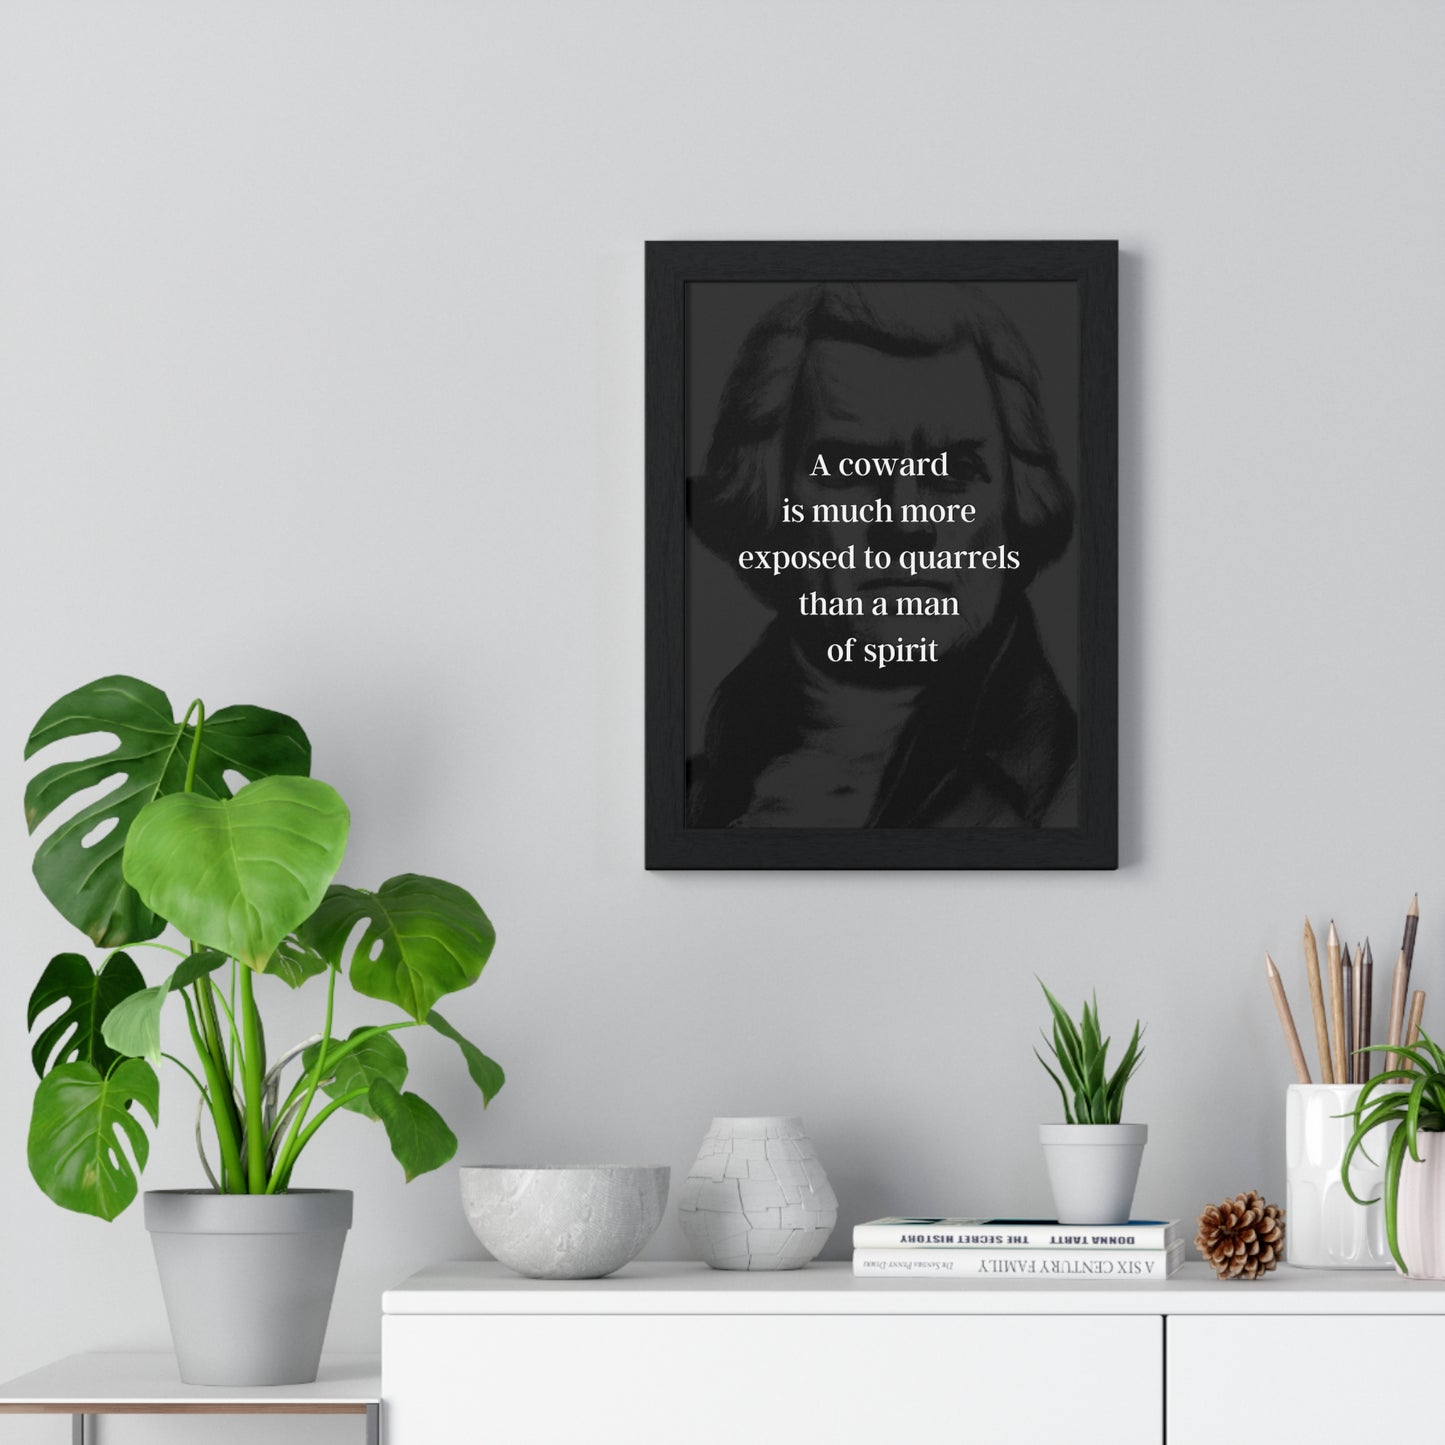 Thomas Jefferson Quote 6, Poster Art, Dark Print, 3rd President of the United States, American Patriots, AI Art, Political Art, Poster Prints, Presidential Portraits, Presidential Quotes, Inspirational Quotes